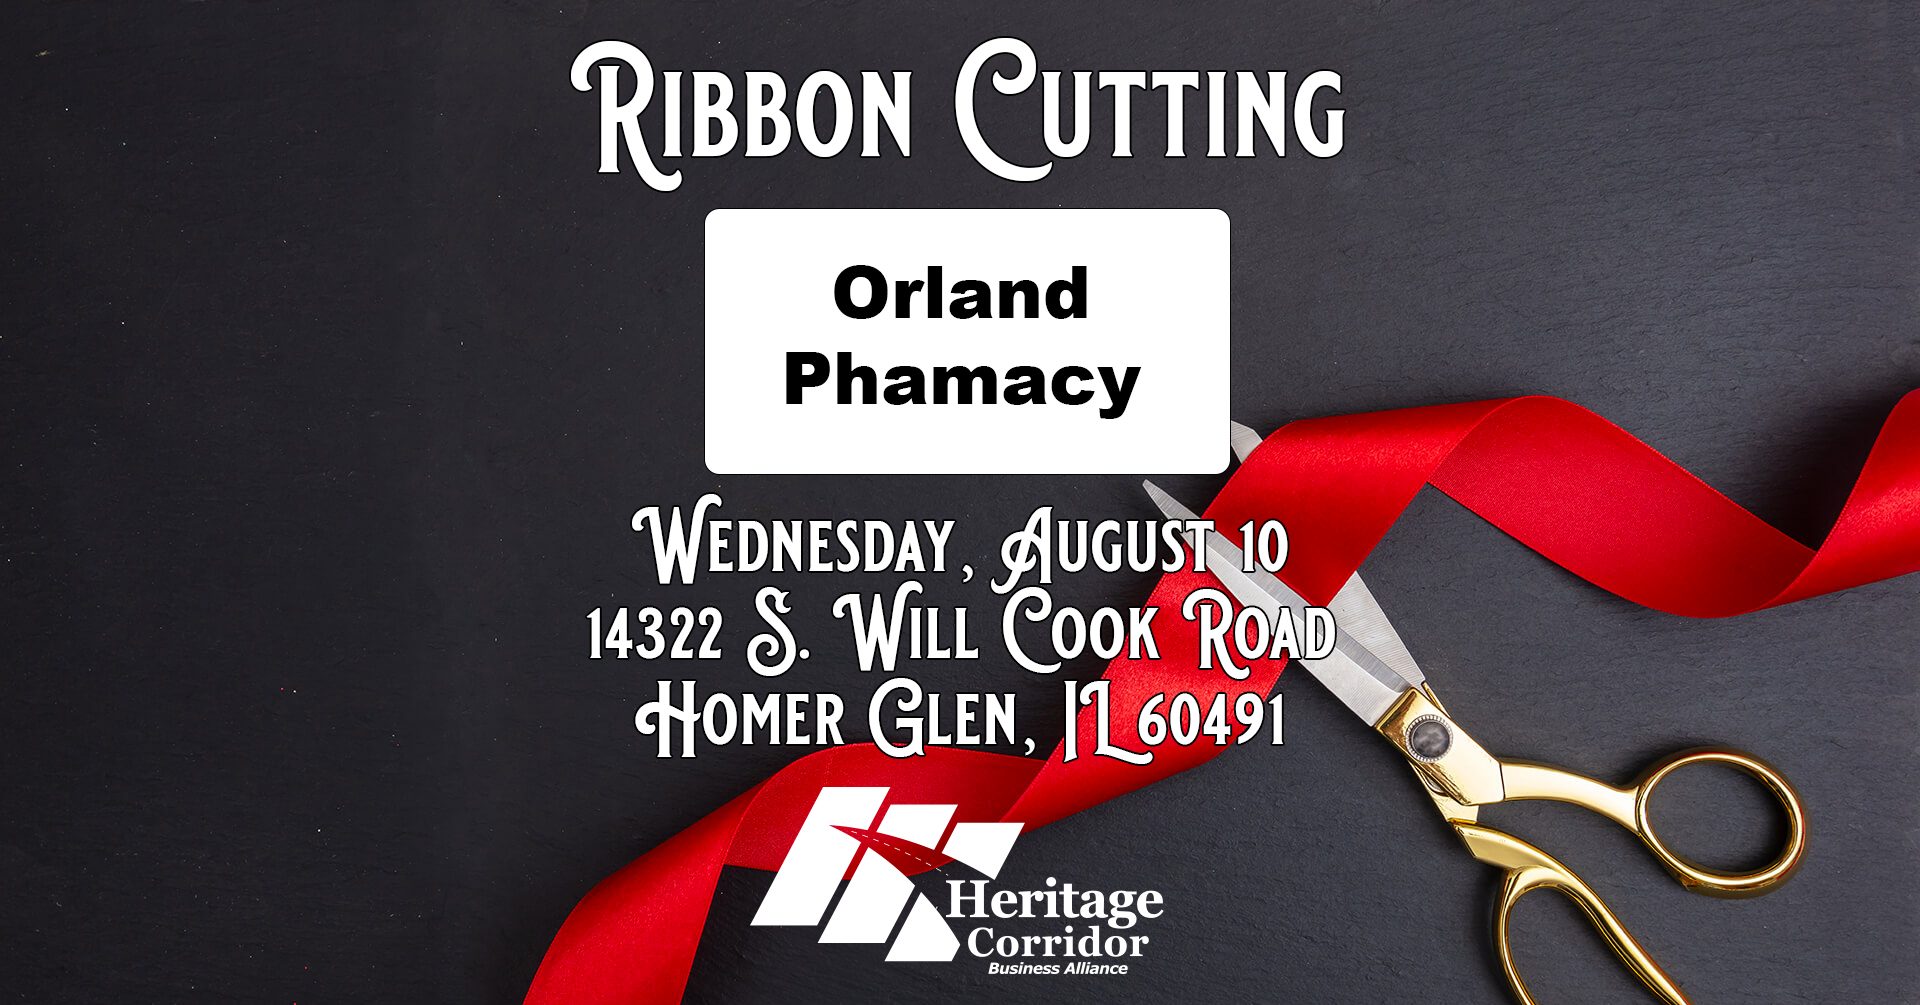 Ribbon Cutting with Scissors, Orland Pharmacy in text